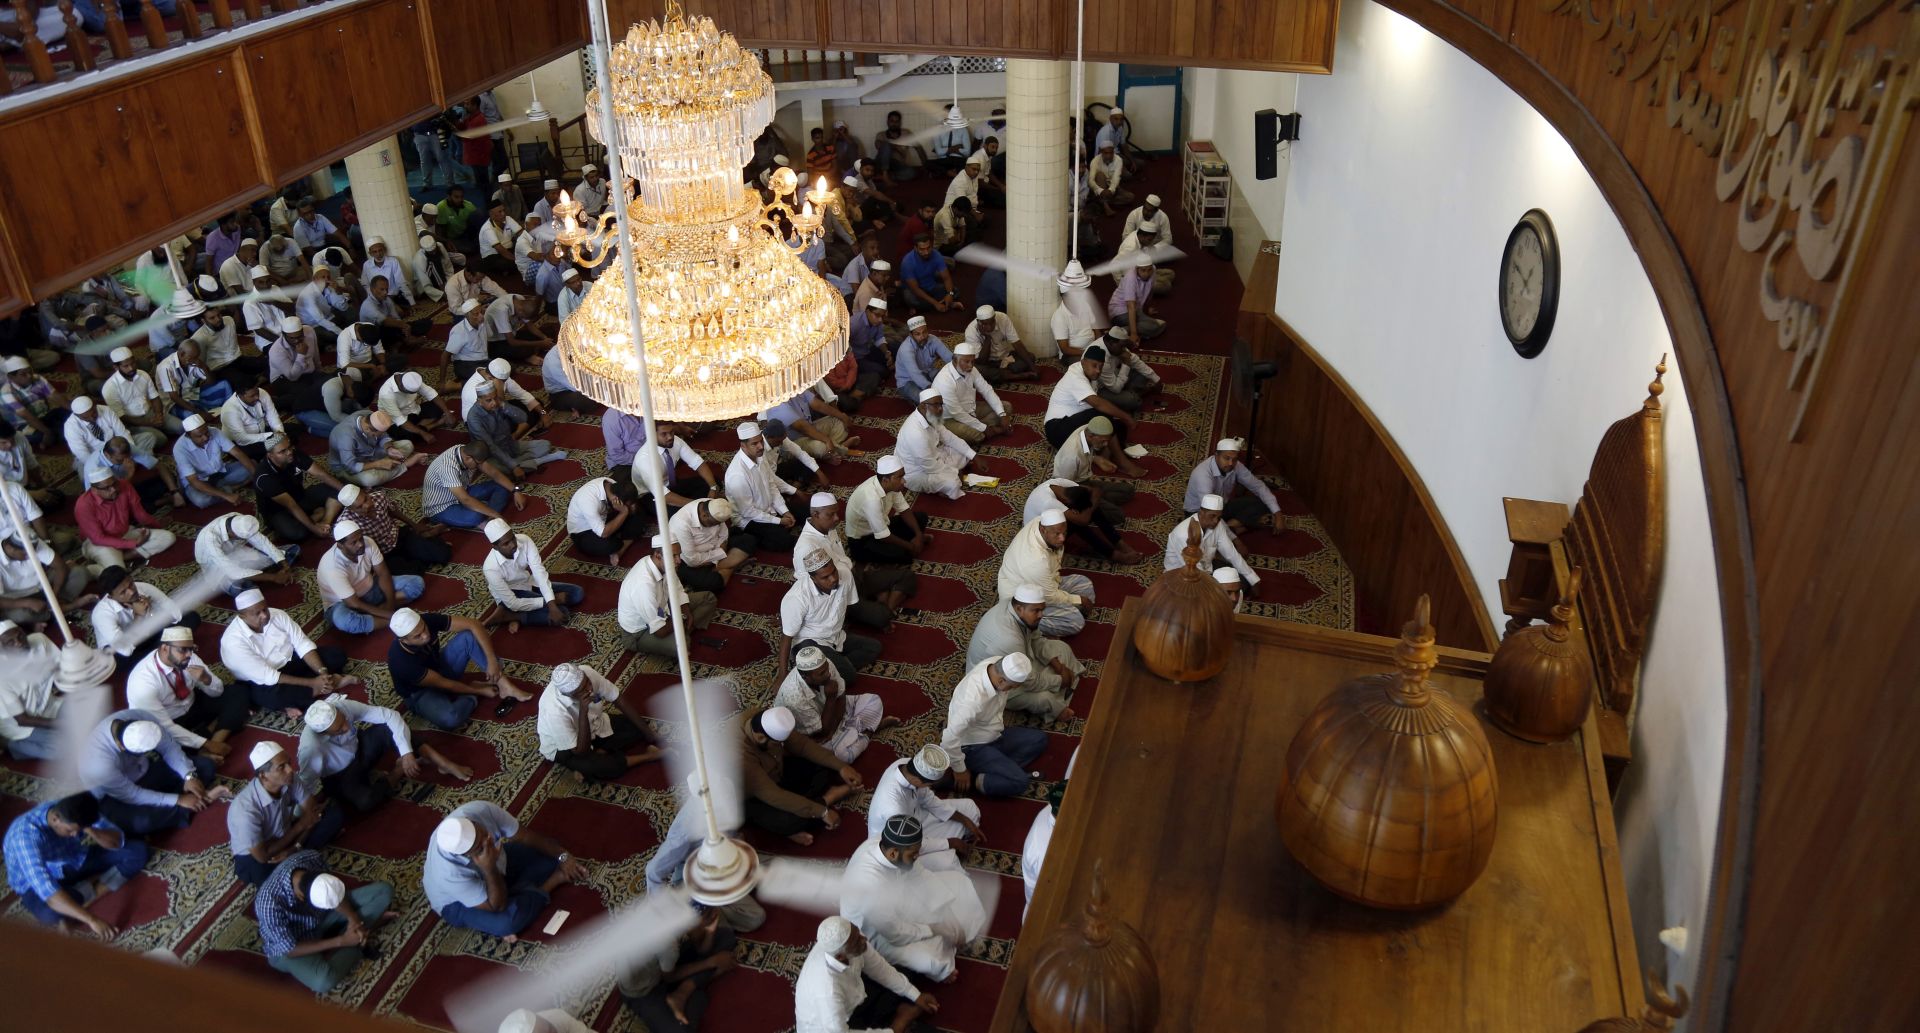 epa07578352 Sri Lankan Muslims during their Friday mid-day prayers at the Dewatagaha Mosque in Colombo, Sri Lanka, 17 May 2019. Under the initiative of the Sri Lankan tri-forces commanders, the military has begun their 're-radicalisation process' by sending officers to mosques to assure the Sri Lankan Muslims, the majority of them who are ethnic Moors, of their safety and to encourage them to return to their normal day to day lives. Following the Easter Sunday suicide bomb attacks widely believed to have been carried out by locals with ISIS links, at several churches and tourist hotels, the Muslims, especially business establishments belonging to ethnic Moors, have come under sporadic attacks in several parts of the island. With conflicting responses from the government and politicians, most Sri Lankans are still varying of returning to normalcy with most school children staying away from their schools. Most expect normalcy to return after the long weekend for the Wesak celebration, which is to be on a low key this year.  EPA/M.A.PUSHPA KUMARA